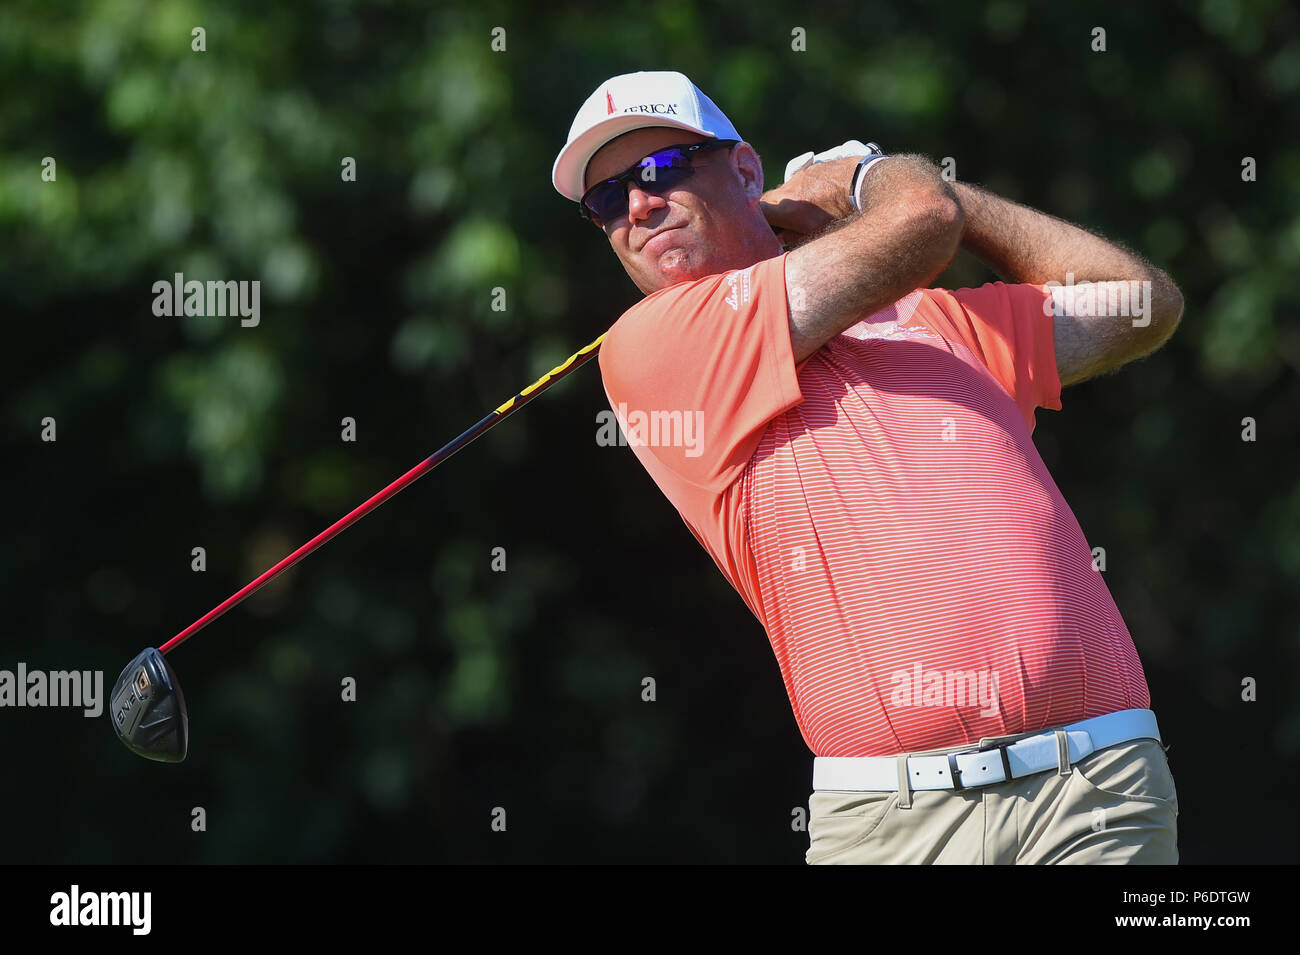 JUNE 29, 2018 - Stewart Cink (USA) tees off at the fifteenth hole during the second round at the 2018 Quicken Loans National at the Tournament Players Club in Potomac Maryland. Stock Photo